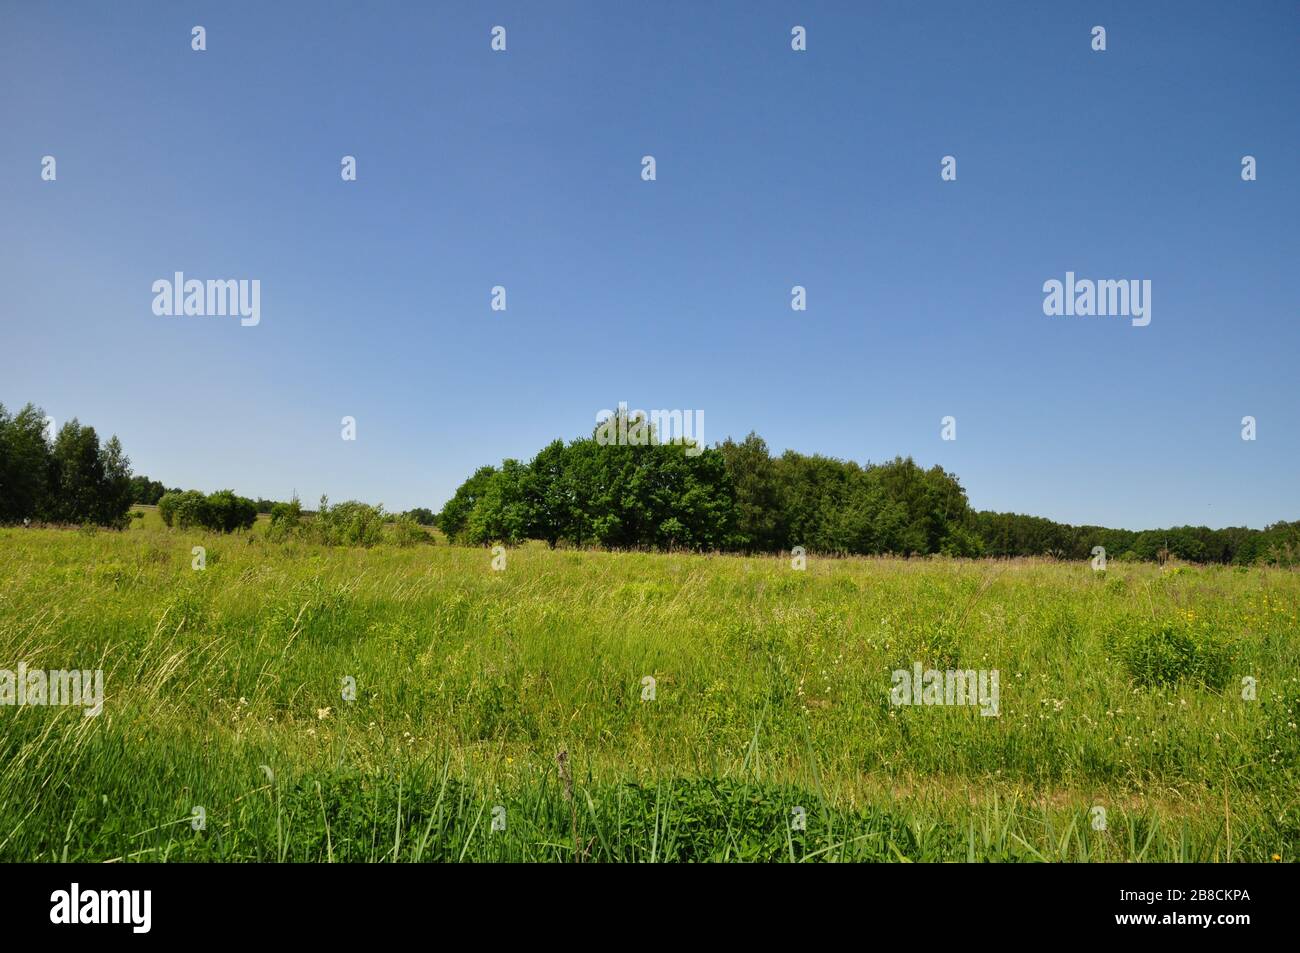 Countryside landscape with group of trees. Stock Photo